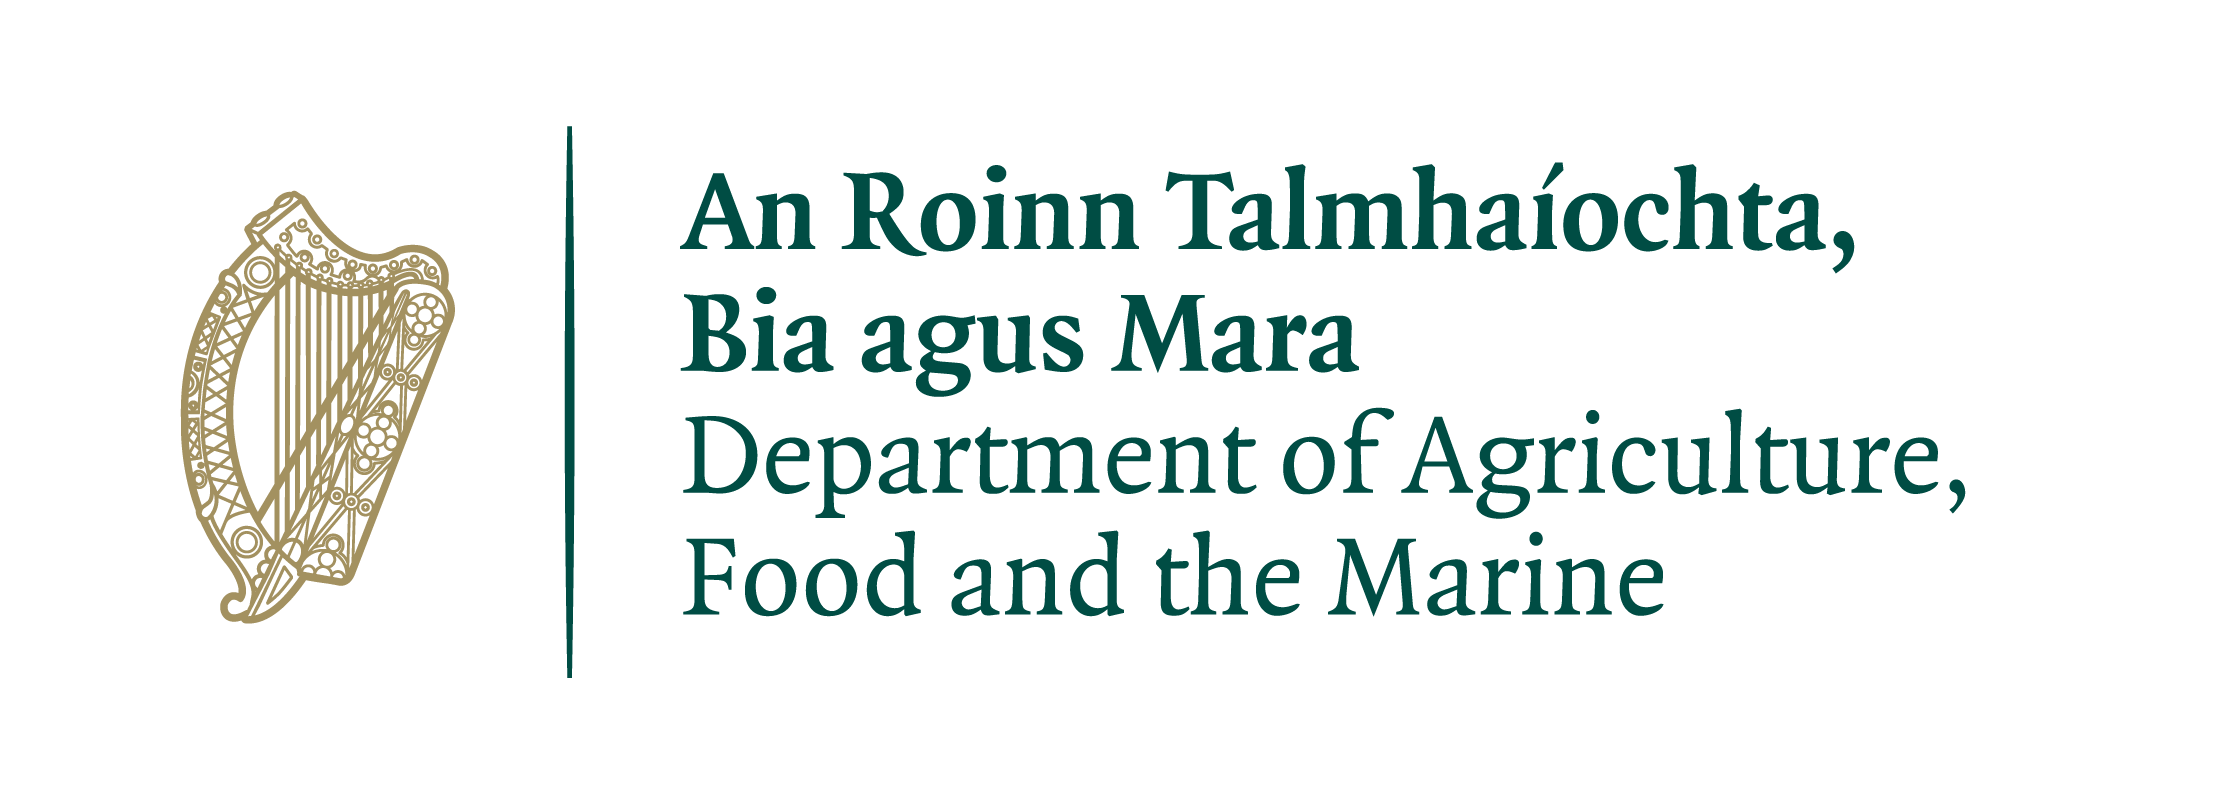  Department of Agriculture, Food and the Marine logo